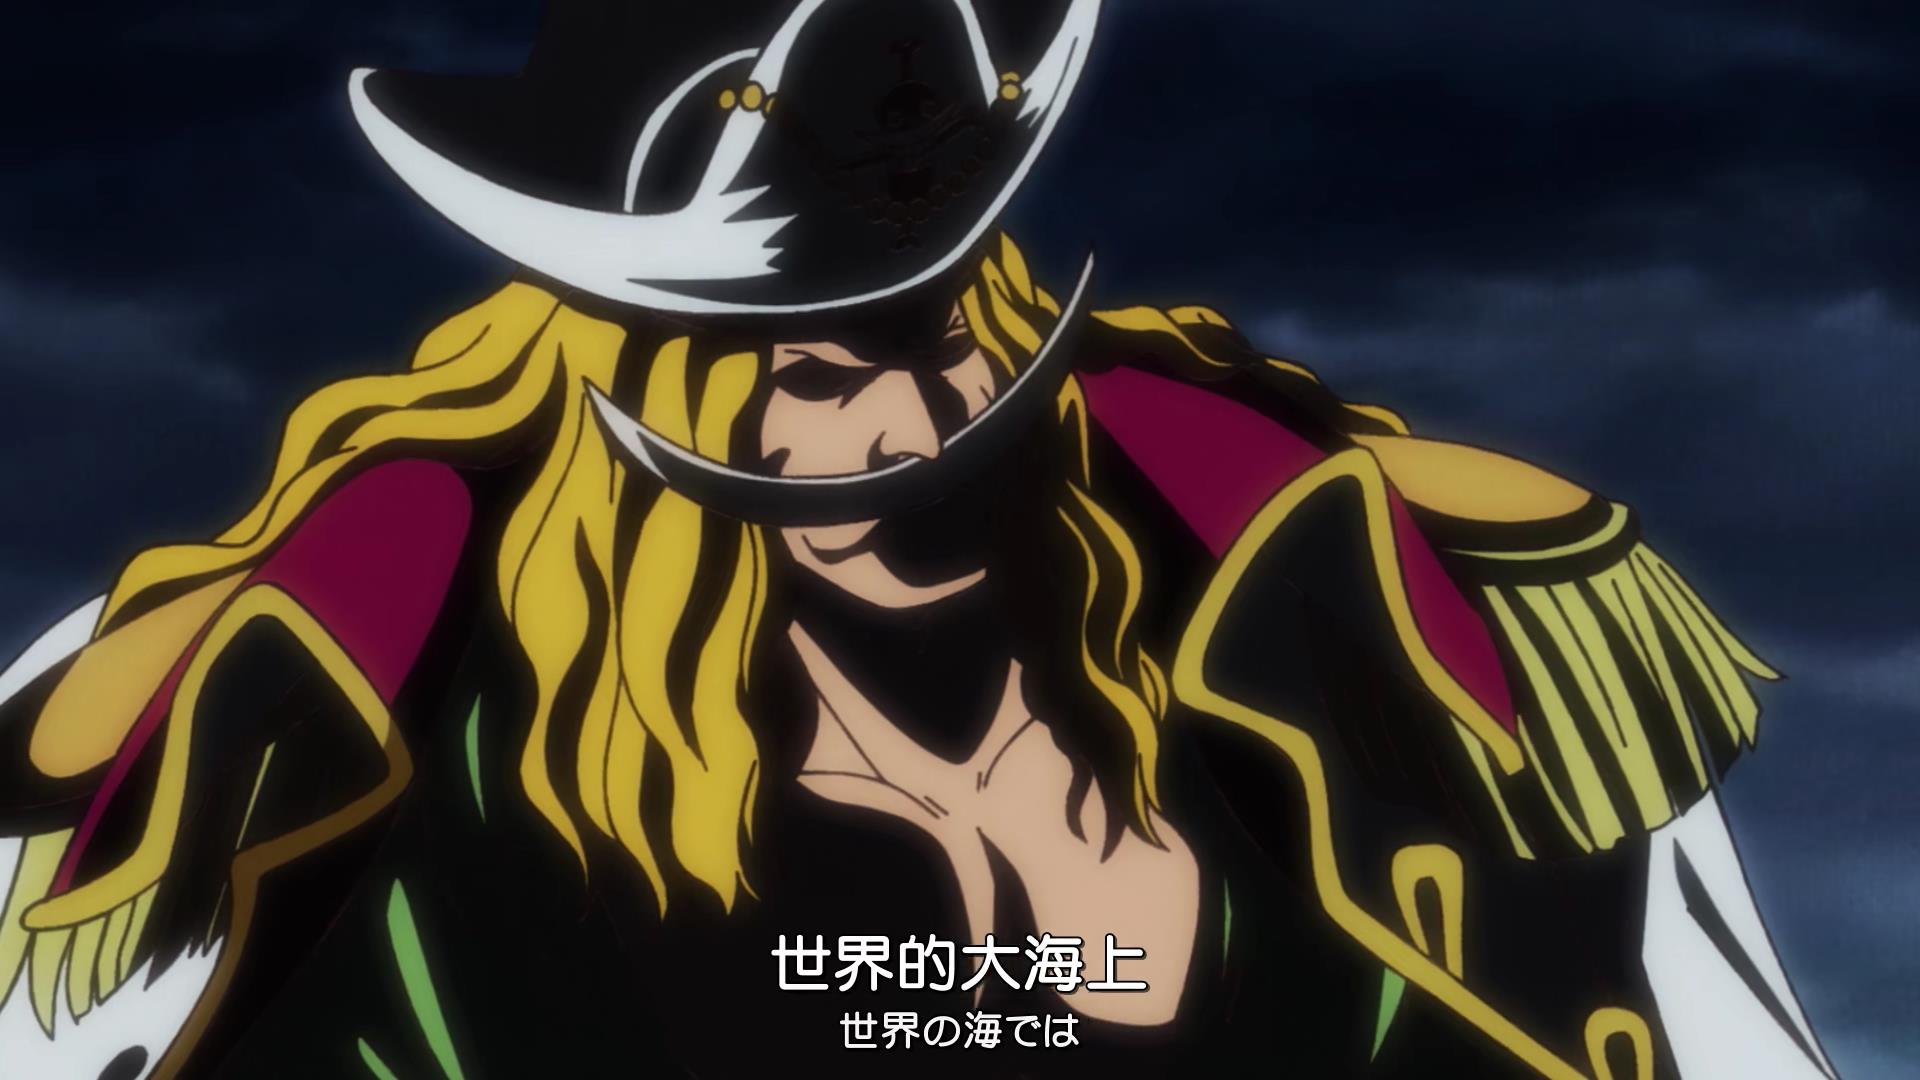 One Piece The Animation Team Announces The Young Appearance Of The Four Emperors Kaido Becomes C In The Rocks Pirates Inews